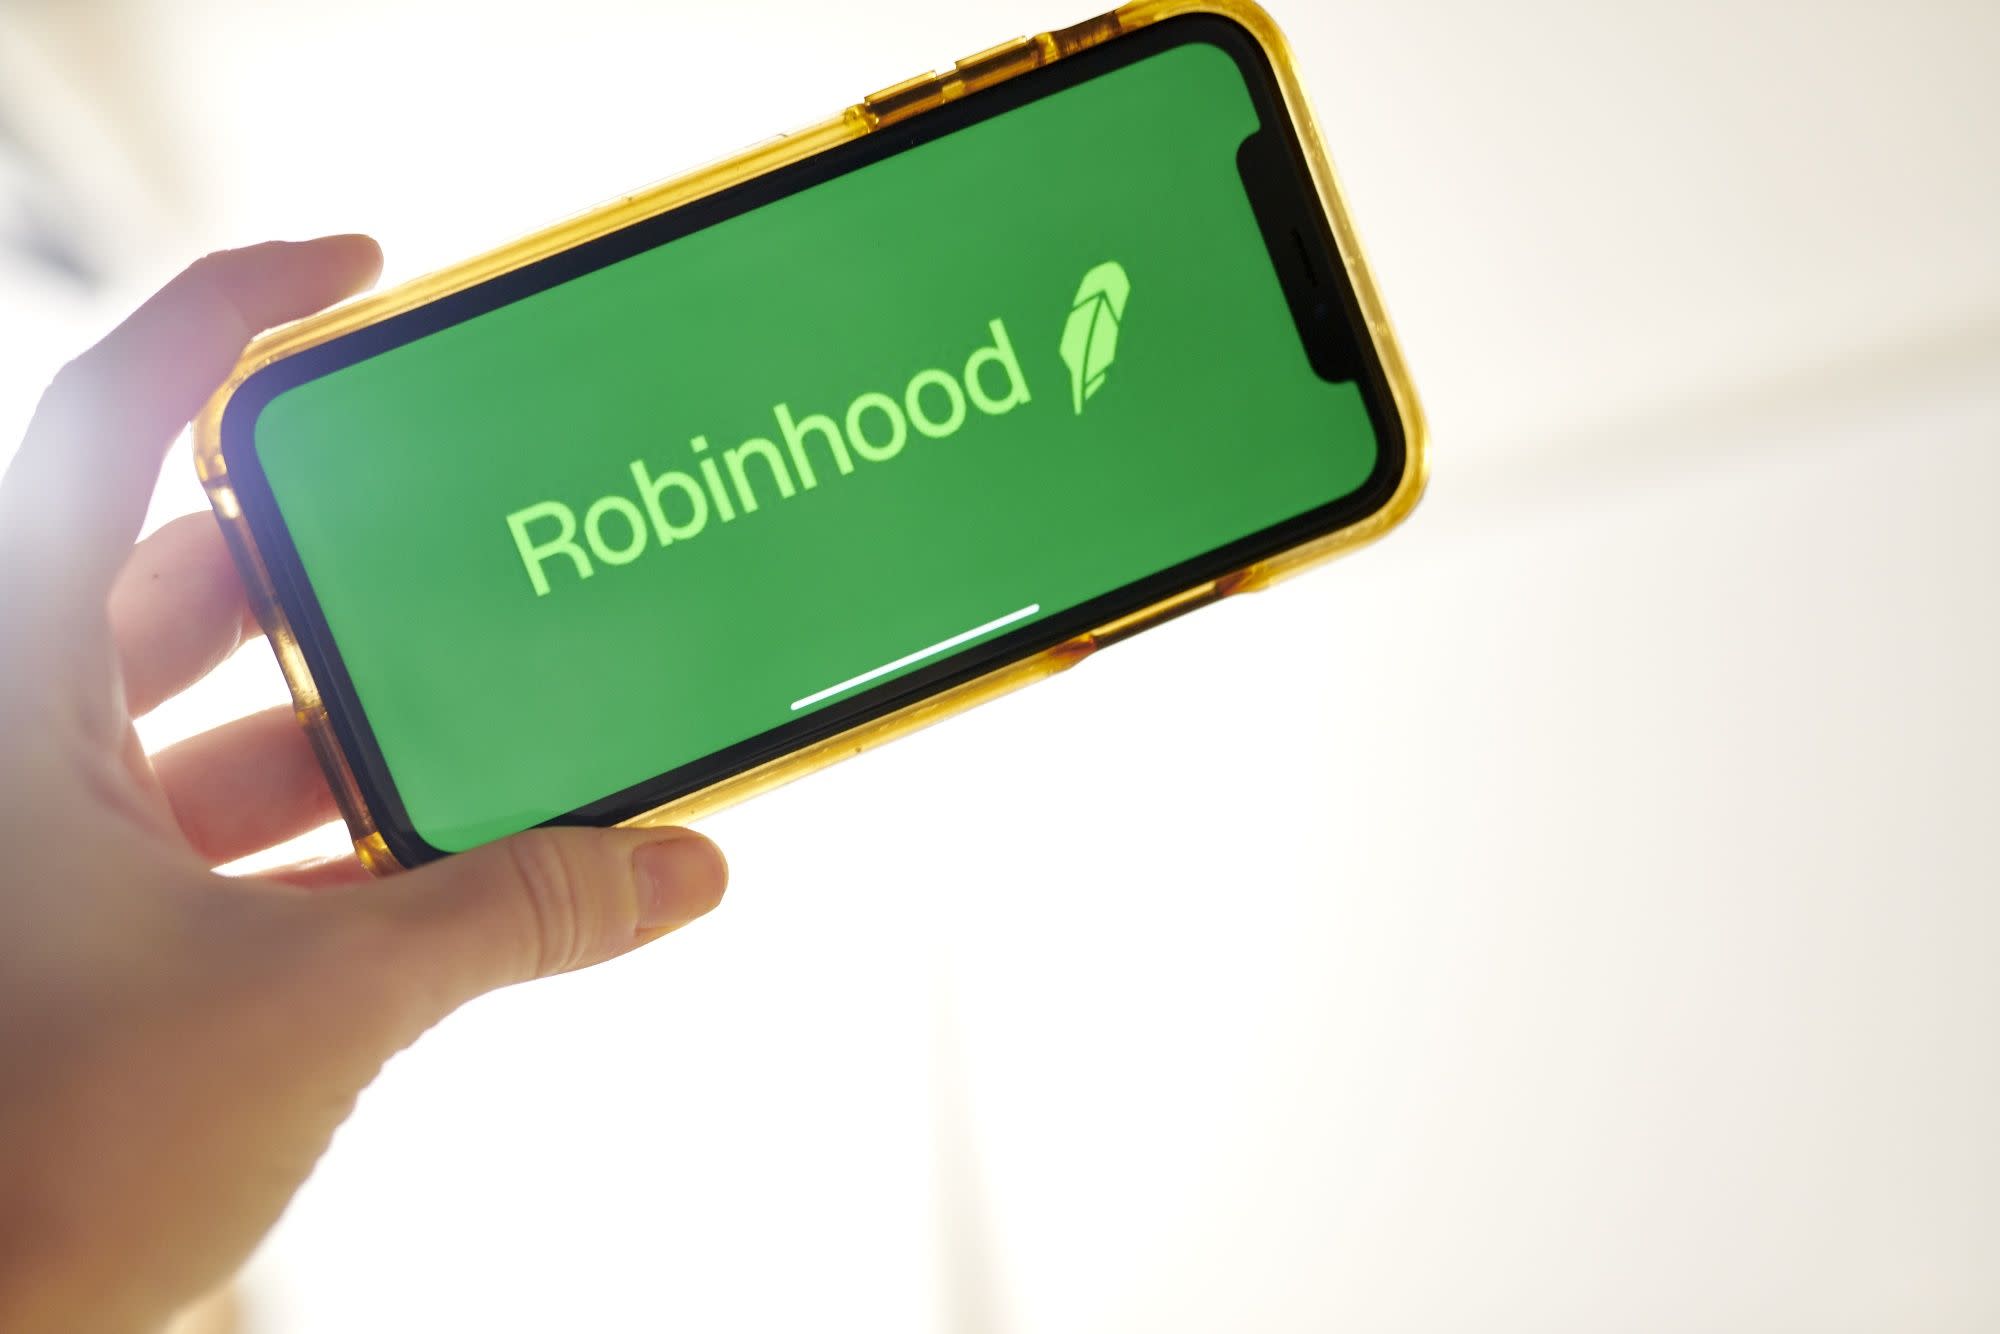 Robinhood plans to file confidential IPO as early as March